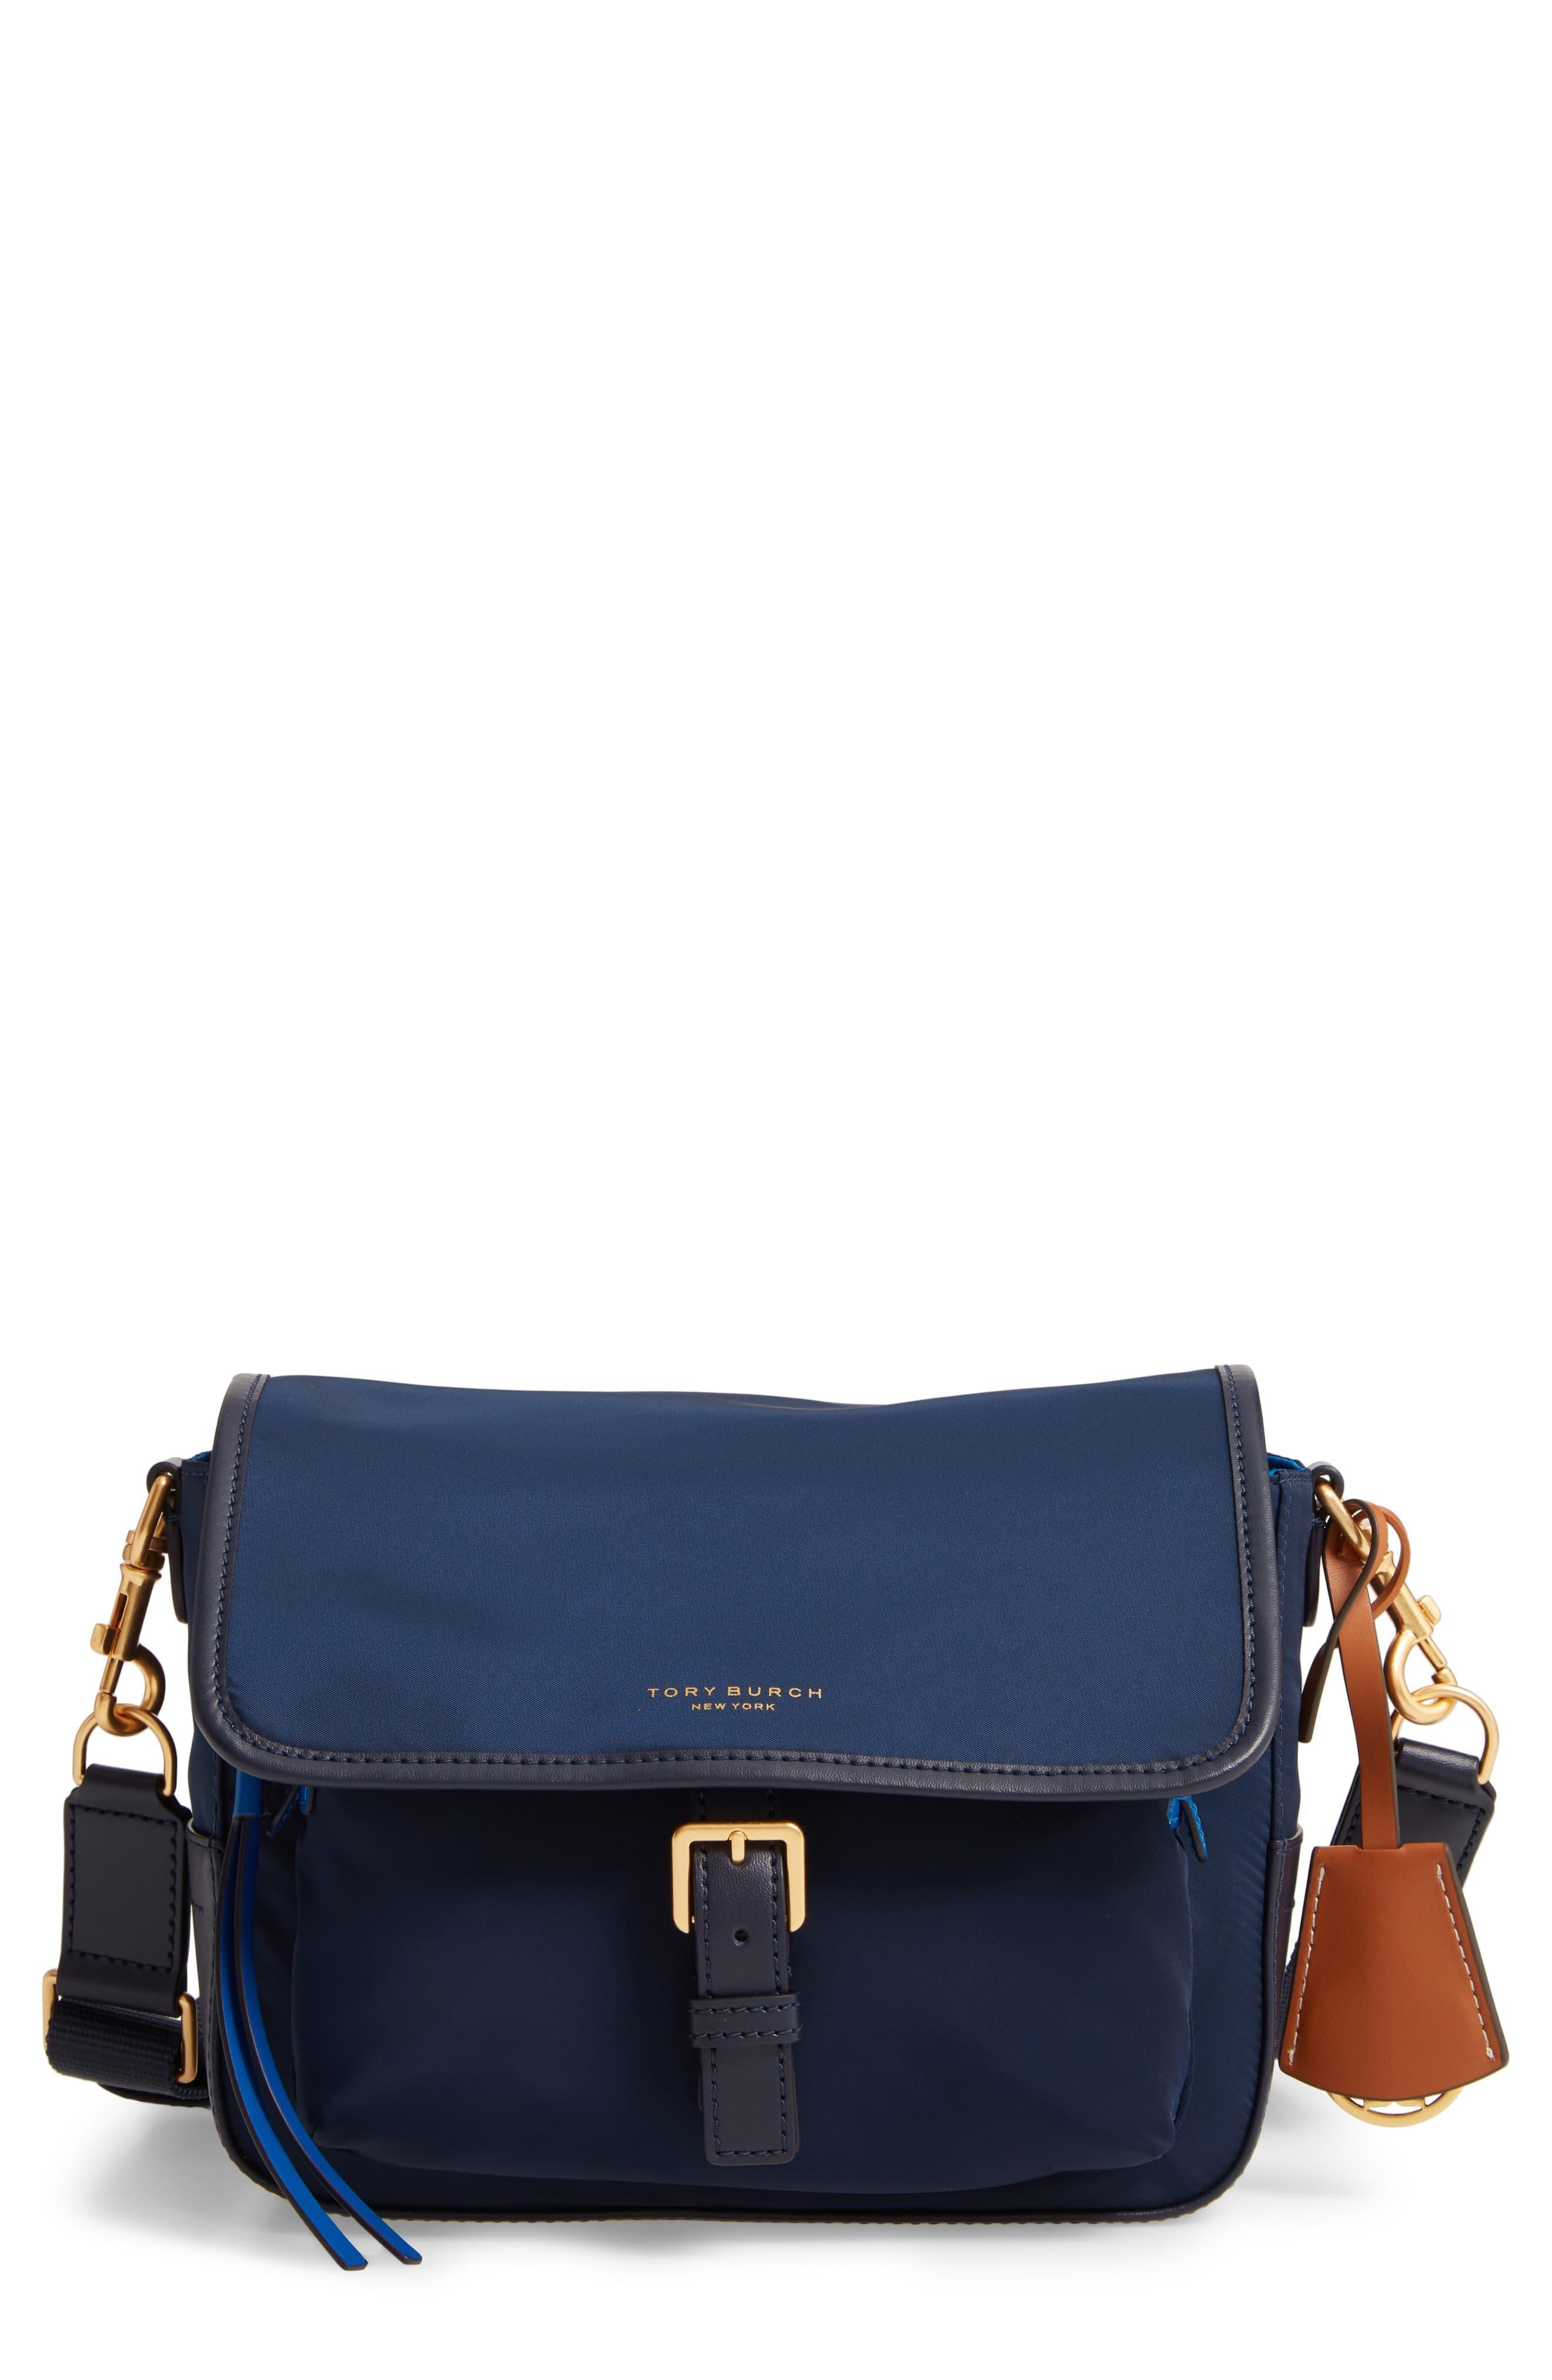 Tory Burch Synthetic Perry Colorblock Nylon Crossbody Bag in Blue - Lyst